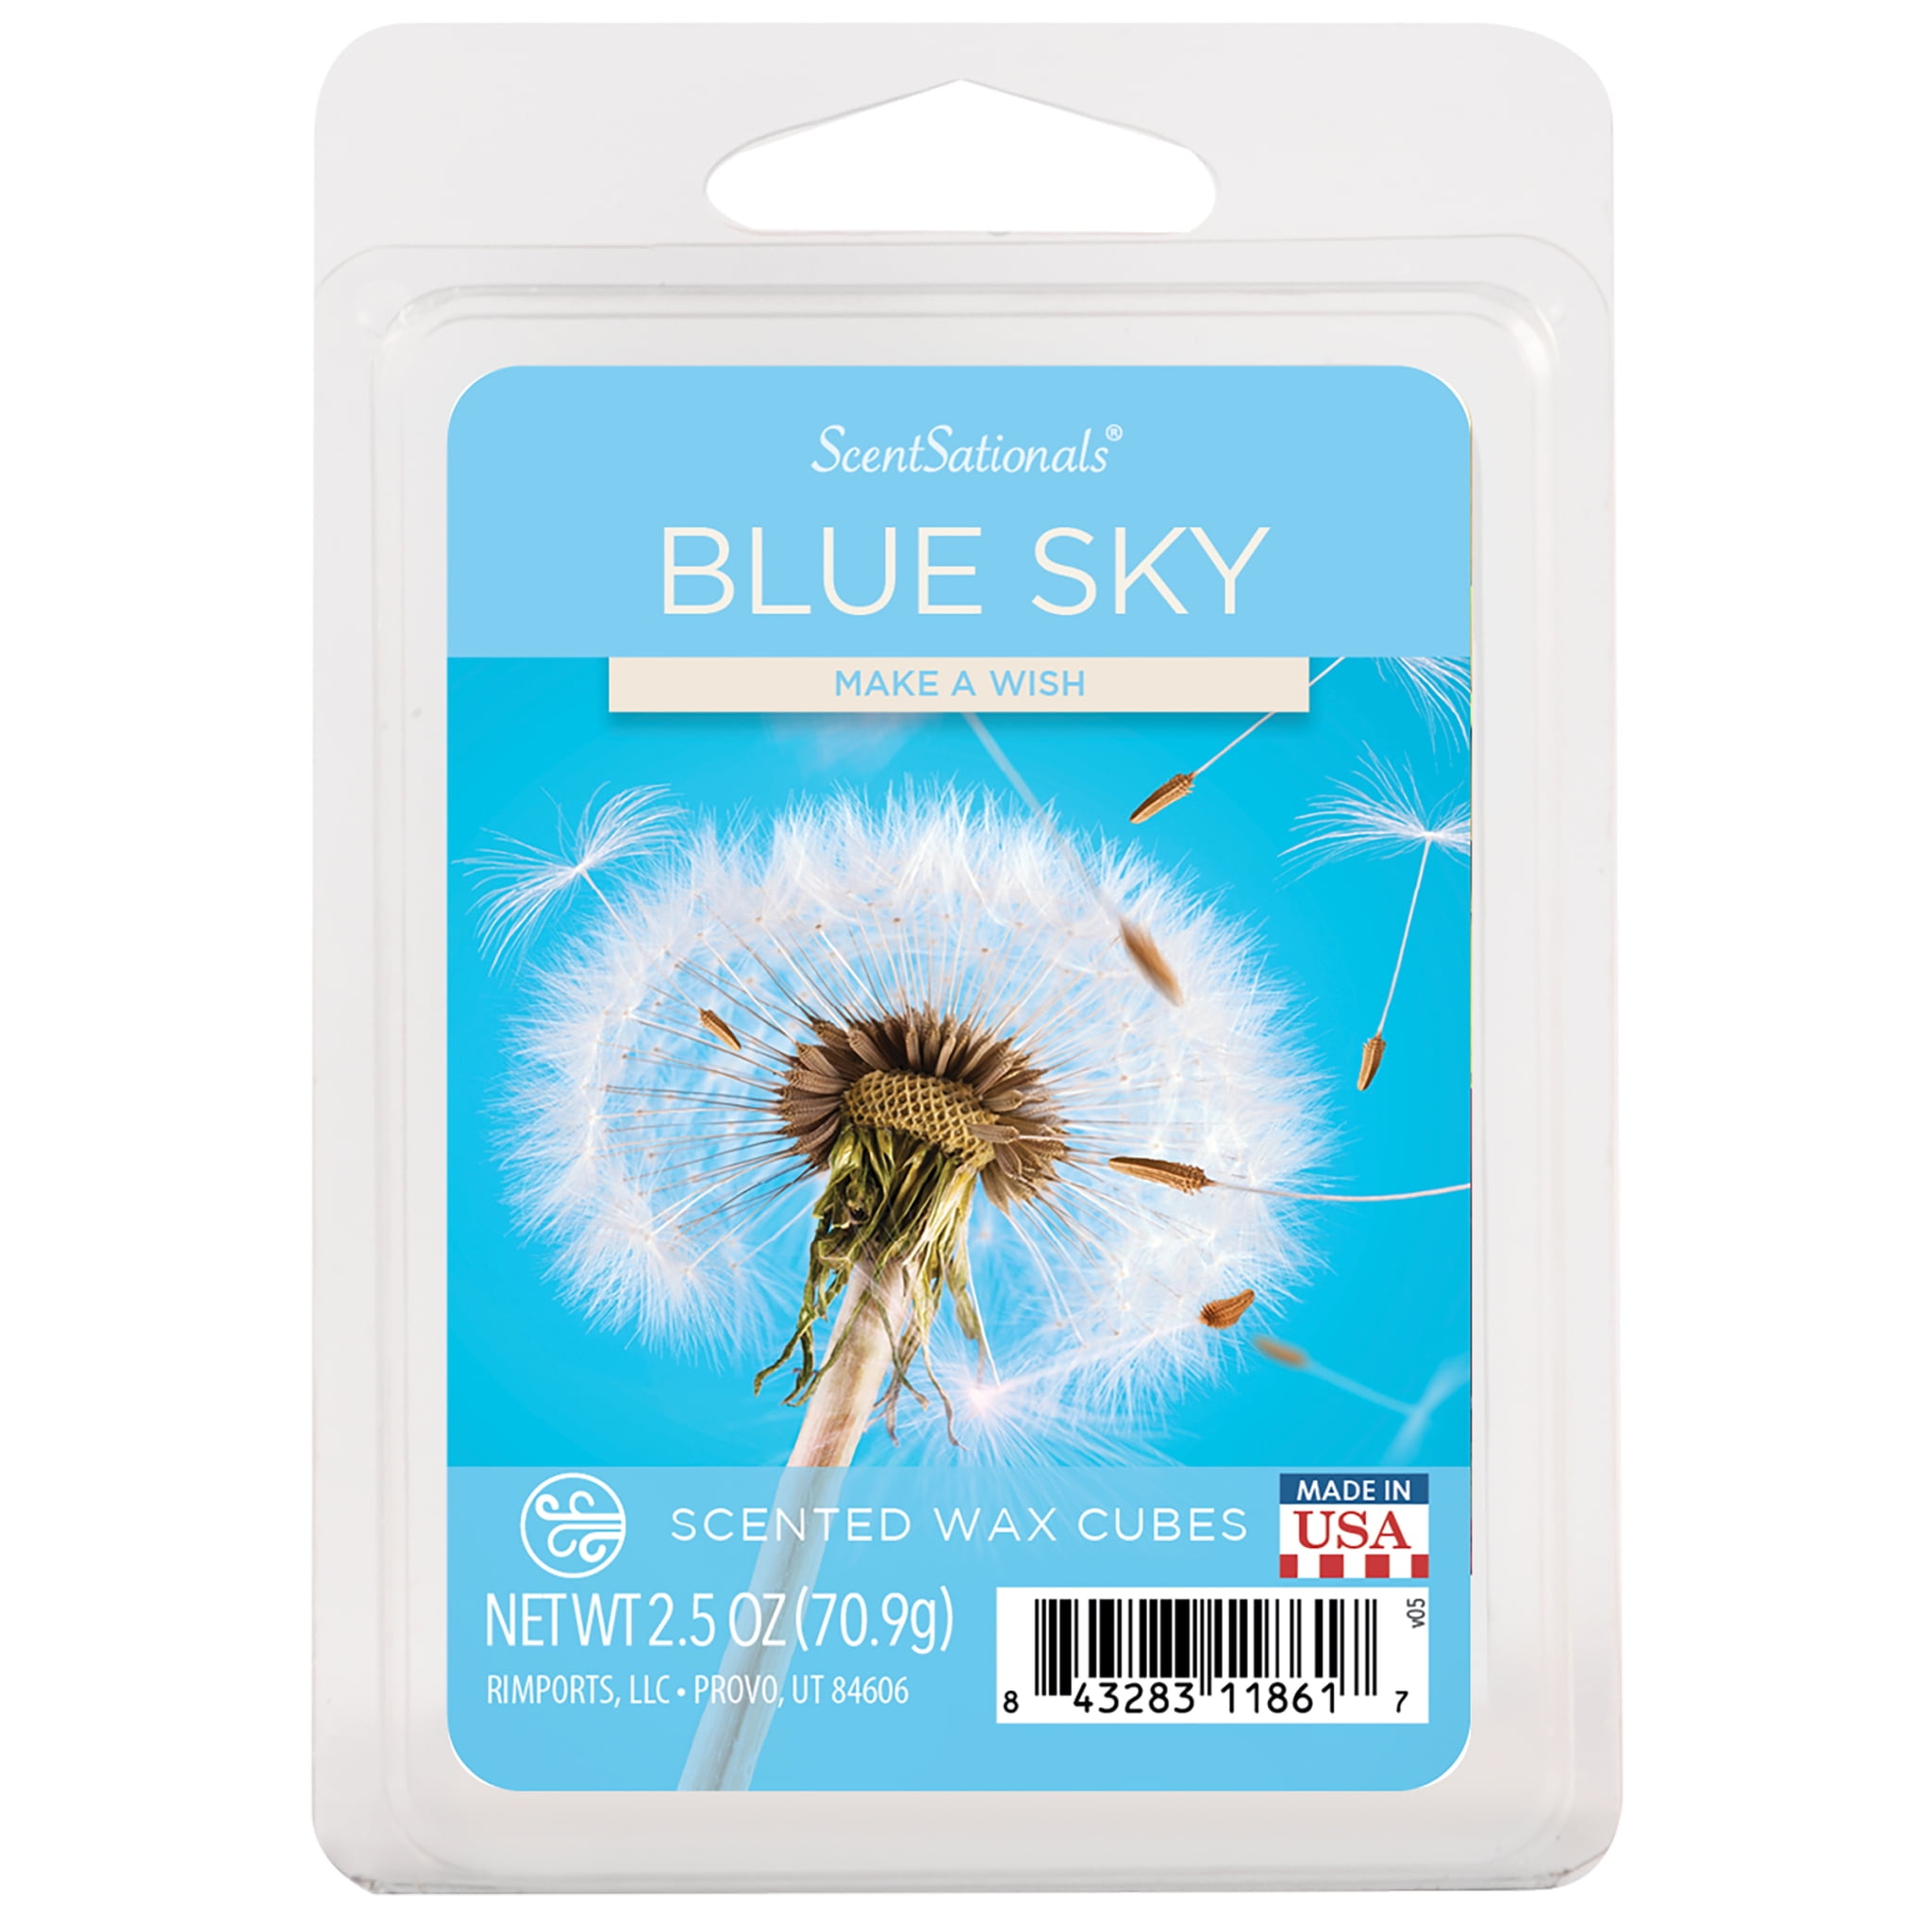 Blue Sky Scented Wax Melts, ScentSationals, 2.5 oz (1-Pack)